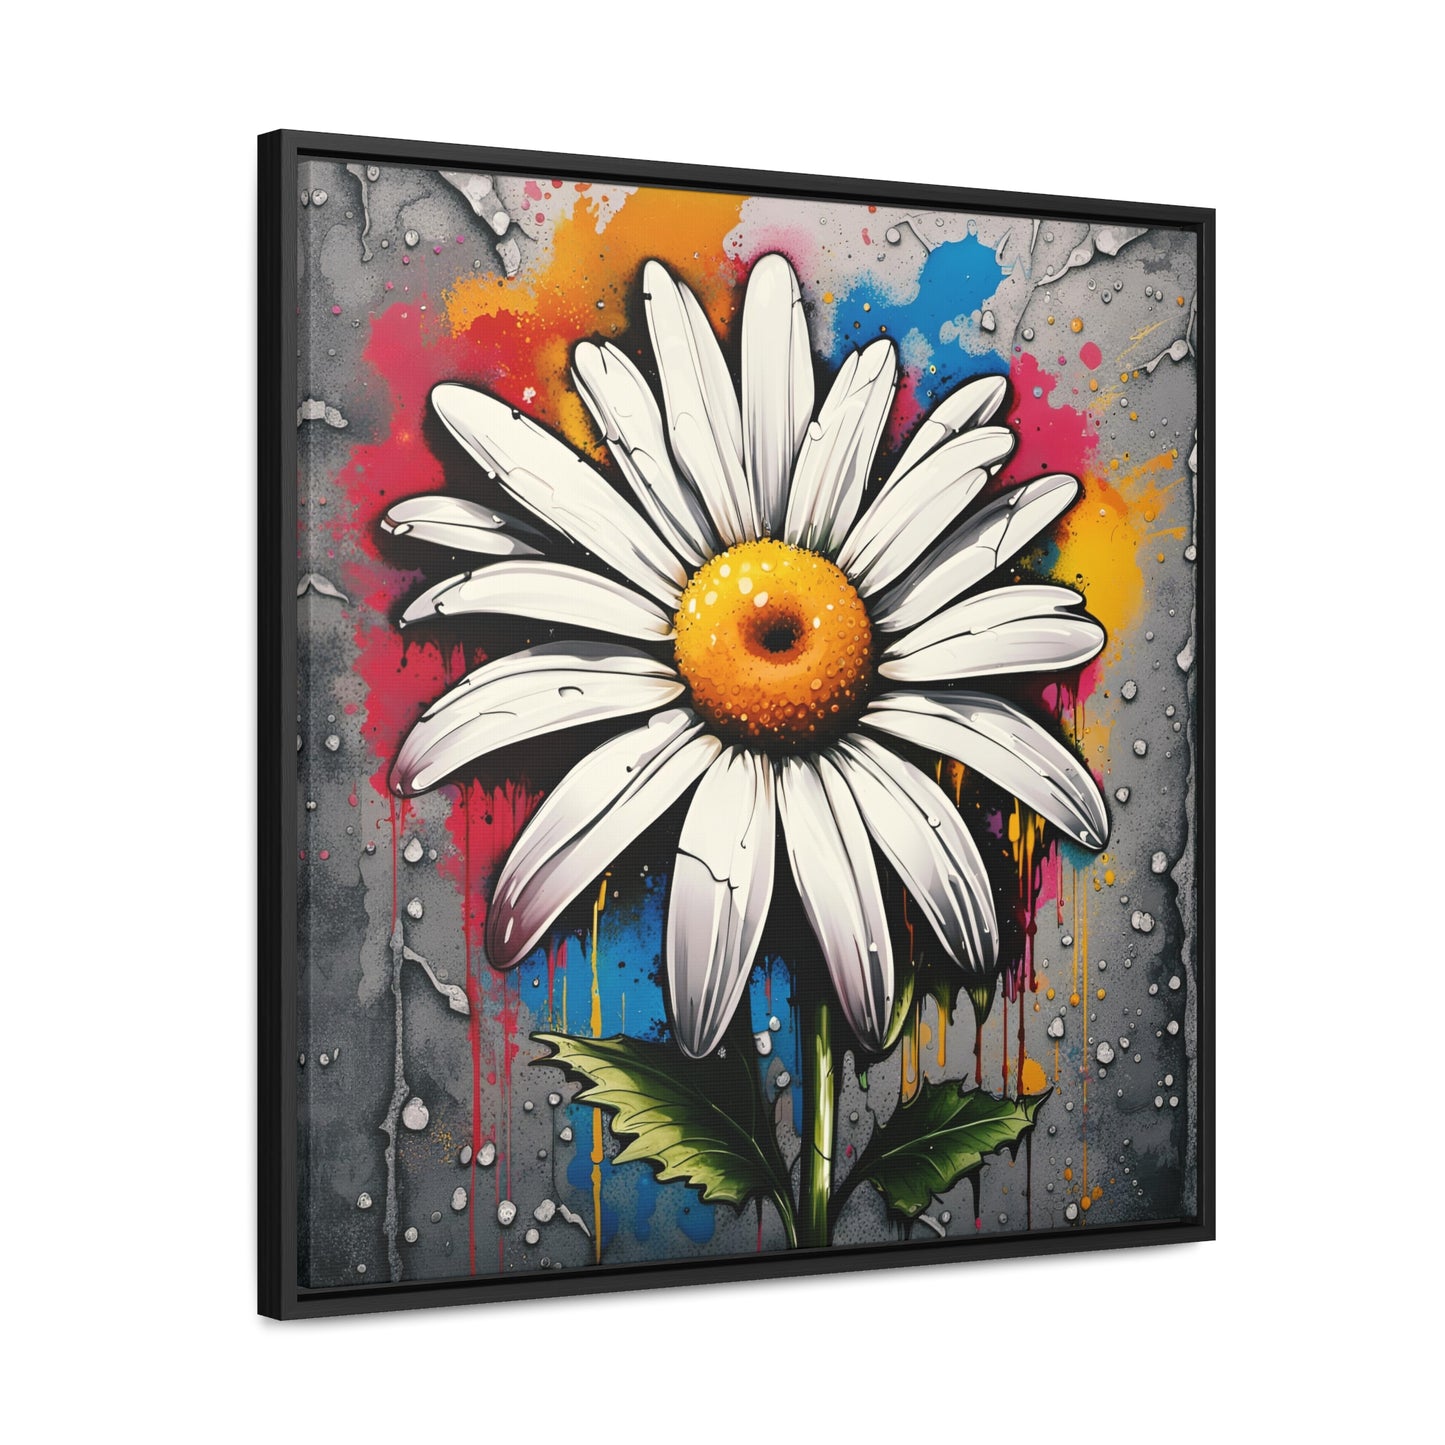 Floral themed Wall Art Print - Street Art Style Graffiti Daisy Printed on Canvas in a Floating Frame